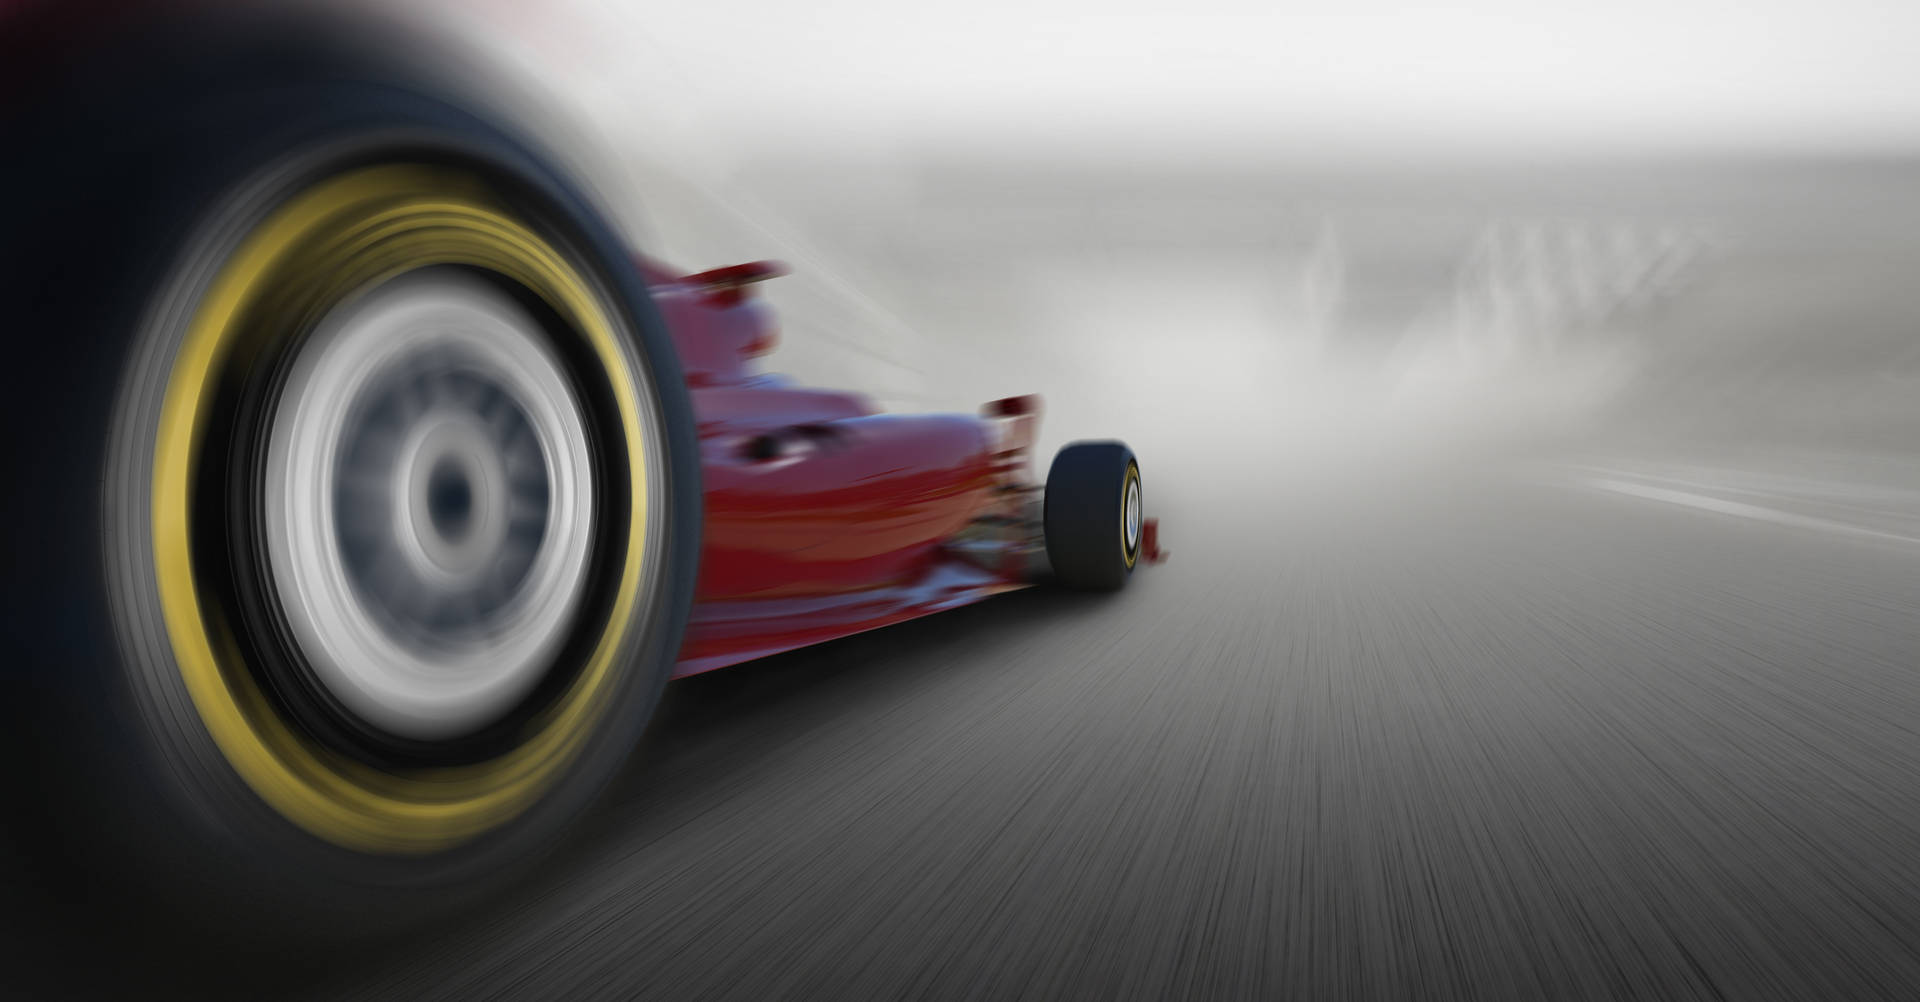 F1 High Speed Racing Background